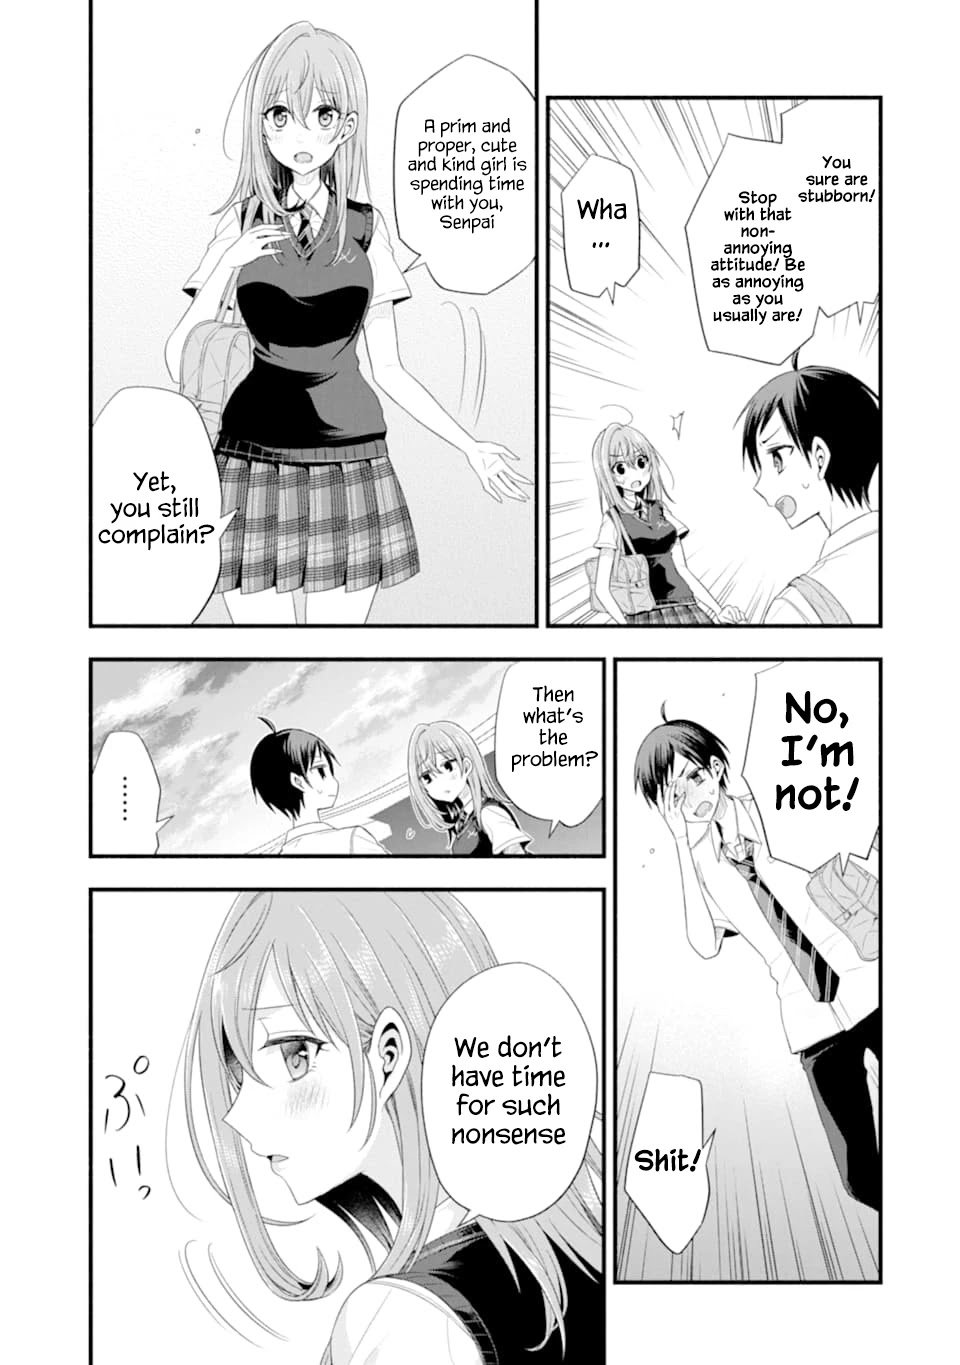 My Friend's Little Sister Is Only Annoying to Me - chapter 15 - #5